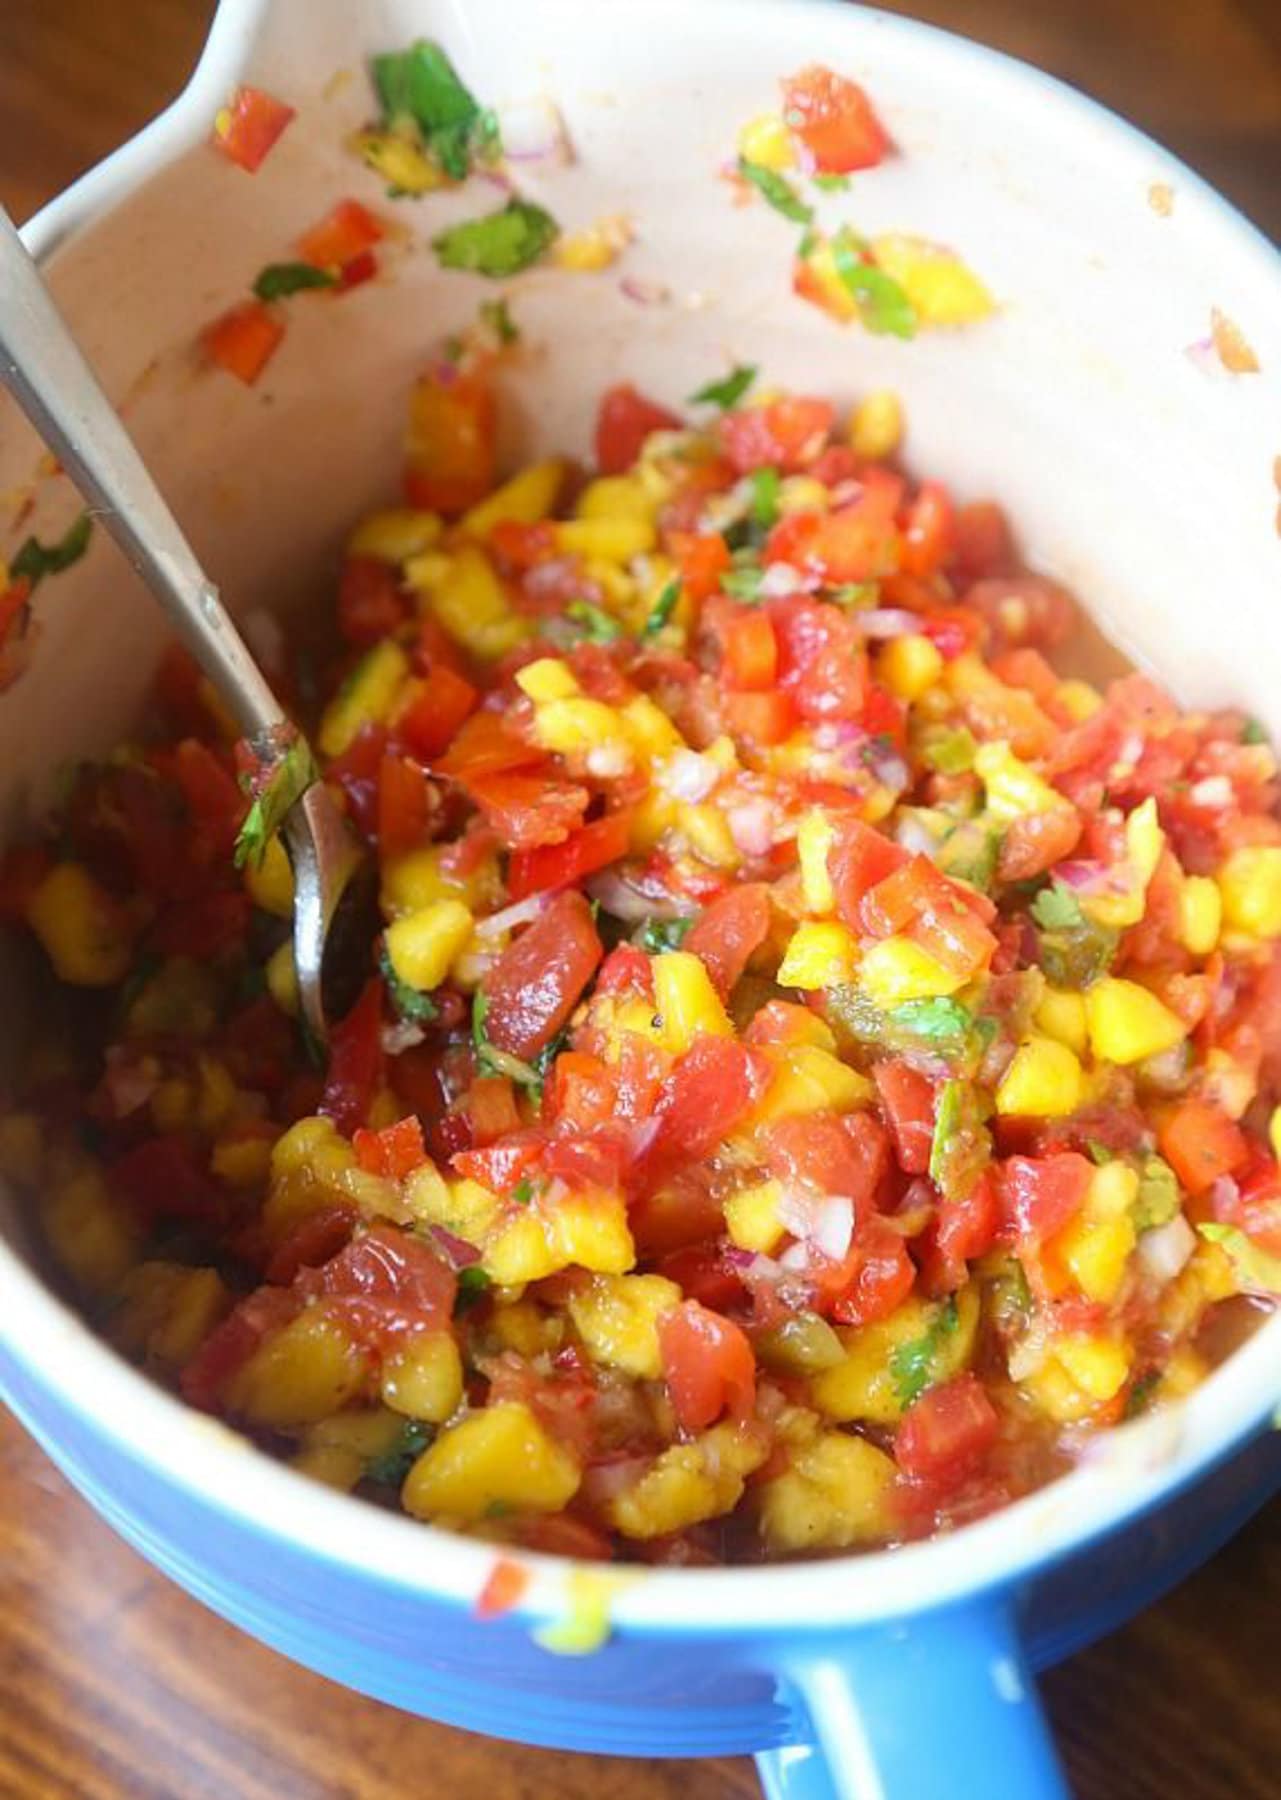 Salsa mixed together in a bowl